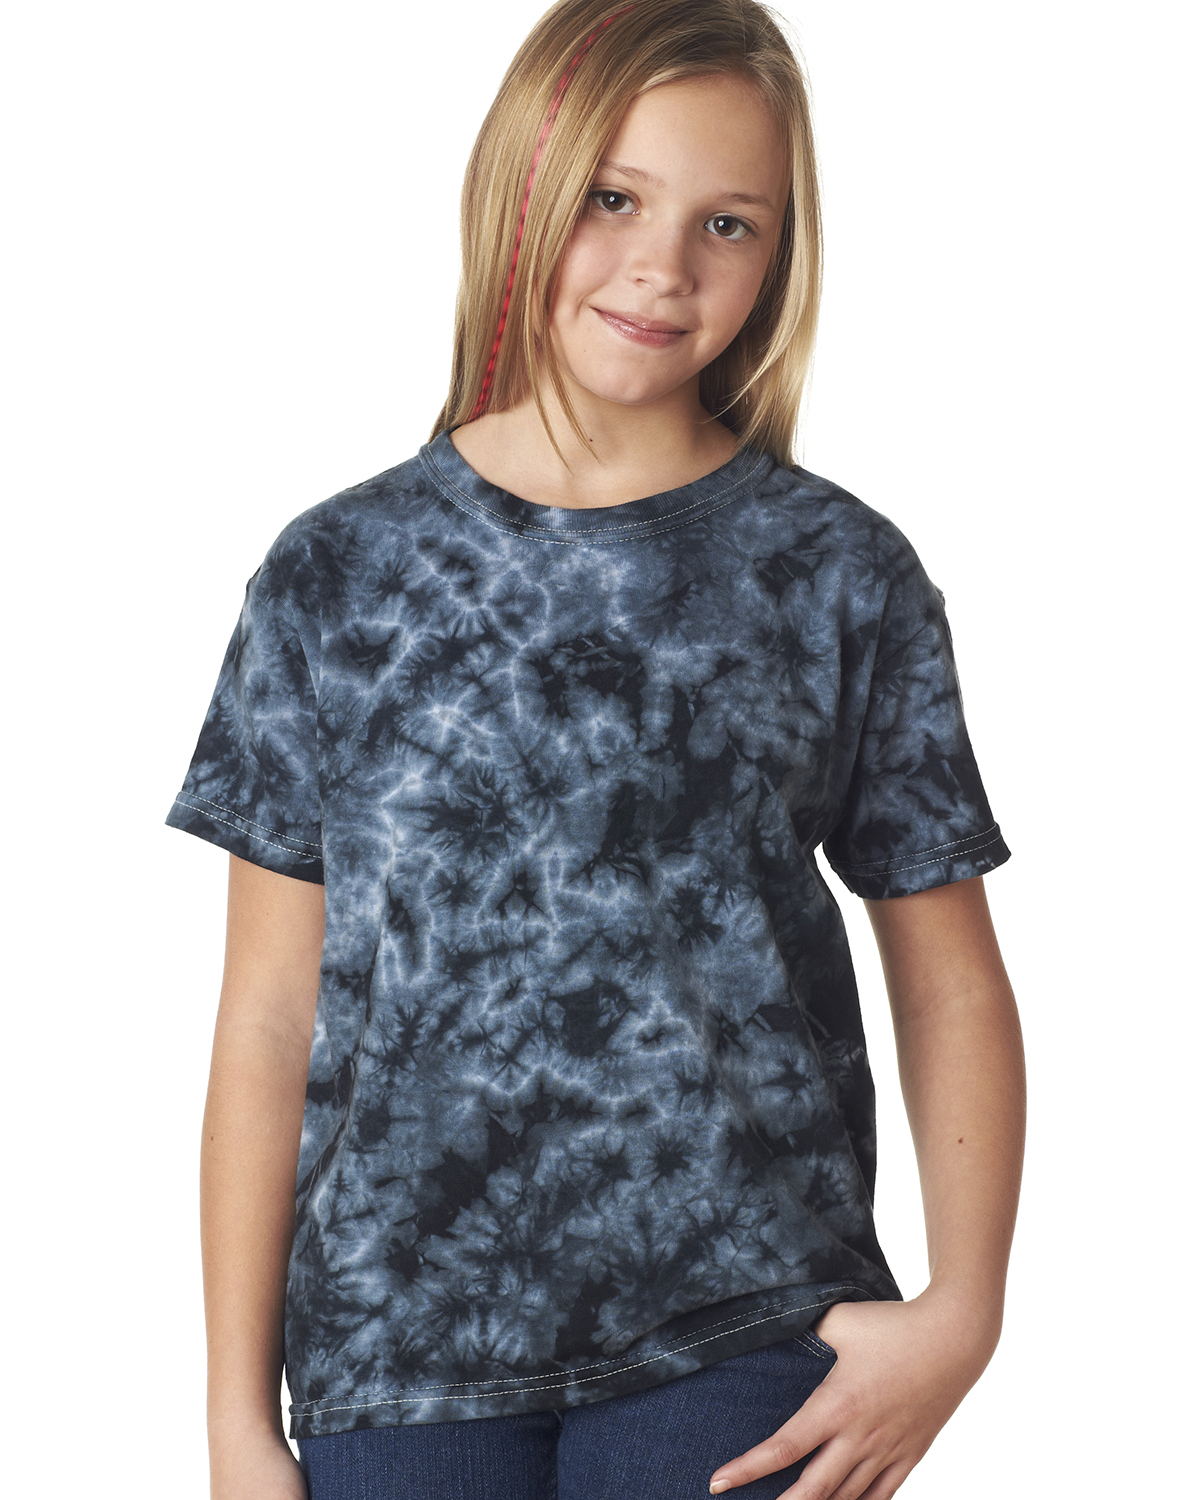 Tie-Dyed 20BCR - Youth Crystals T-Shirt $8.87 - T-Shirts